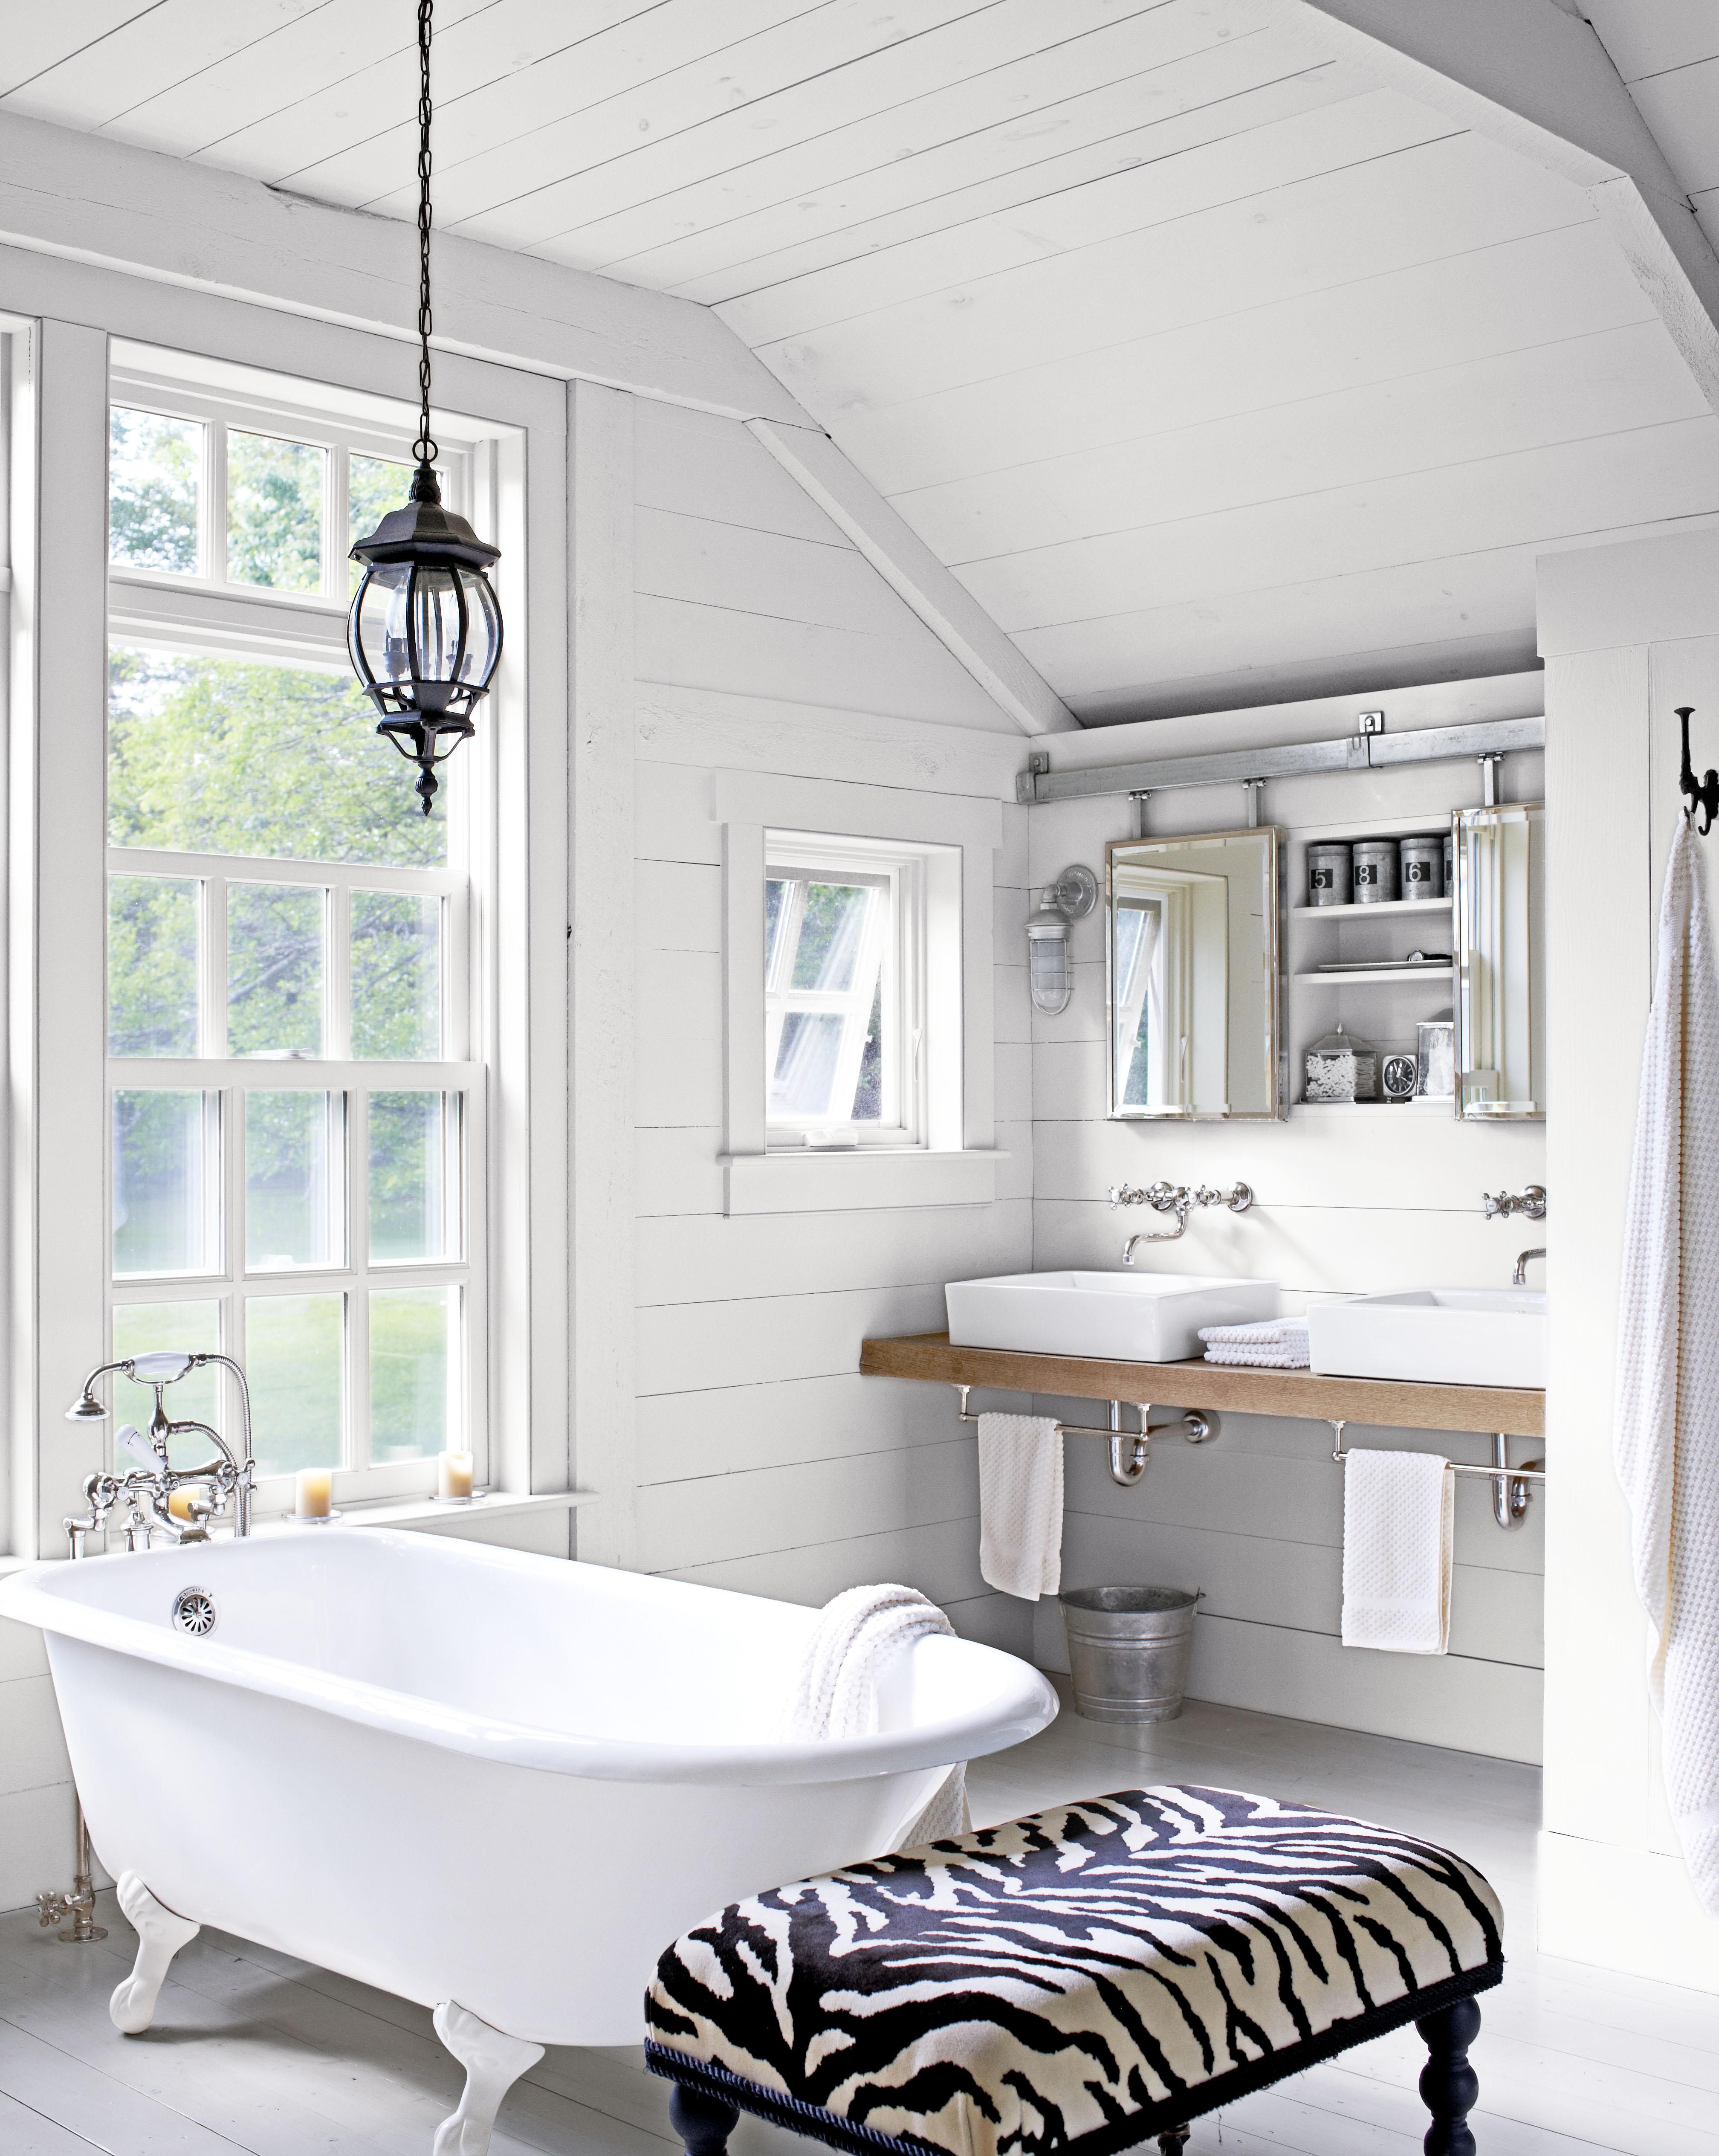 Clawfoot Tub Ideas For Your Bathroom, Vanity To Go With Clawfoot Tub